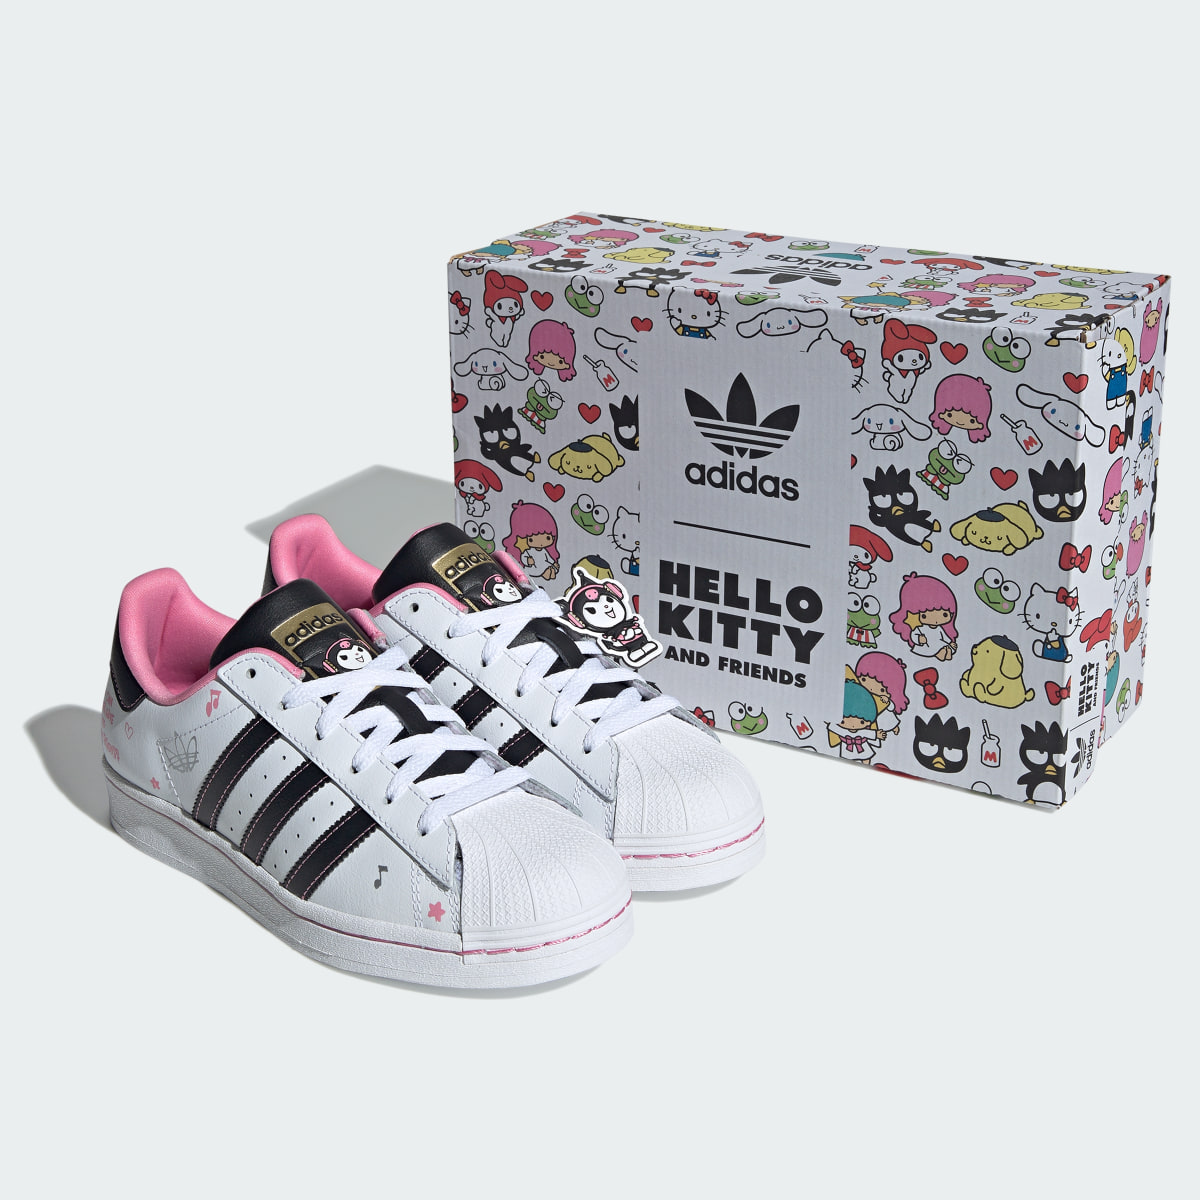 Adidas Originals x Hello Kitty and Friends Superstar Shoes Kids. 7